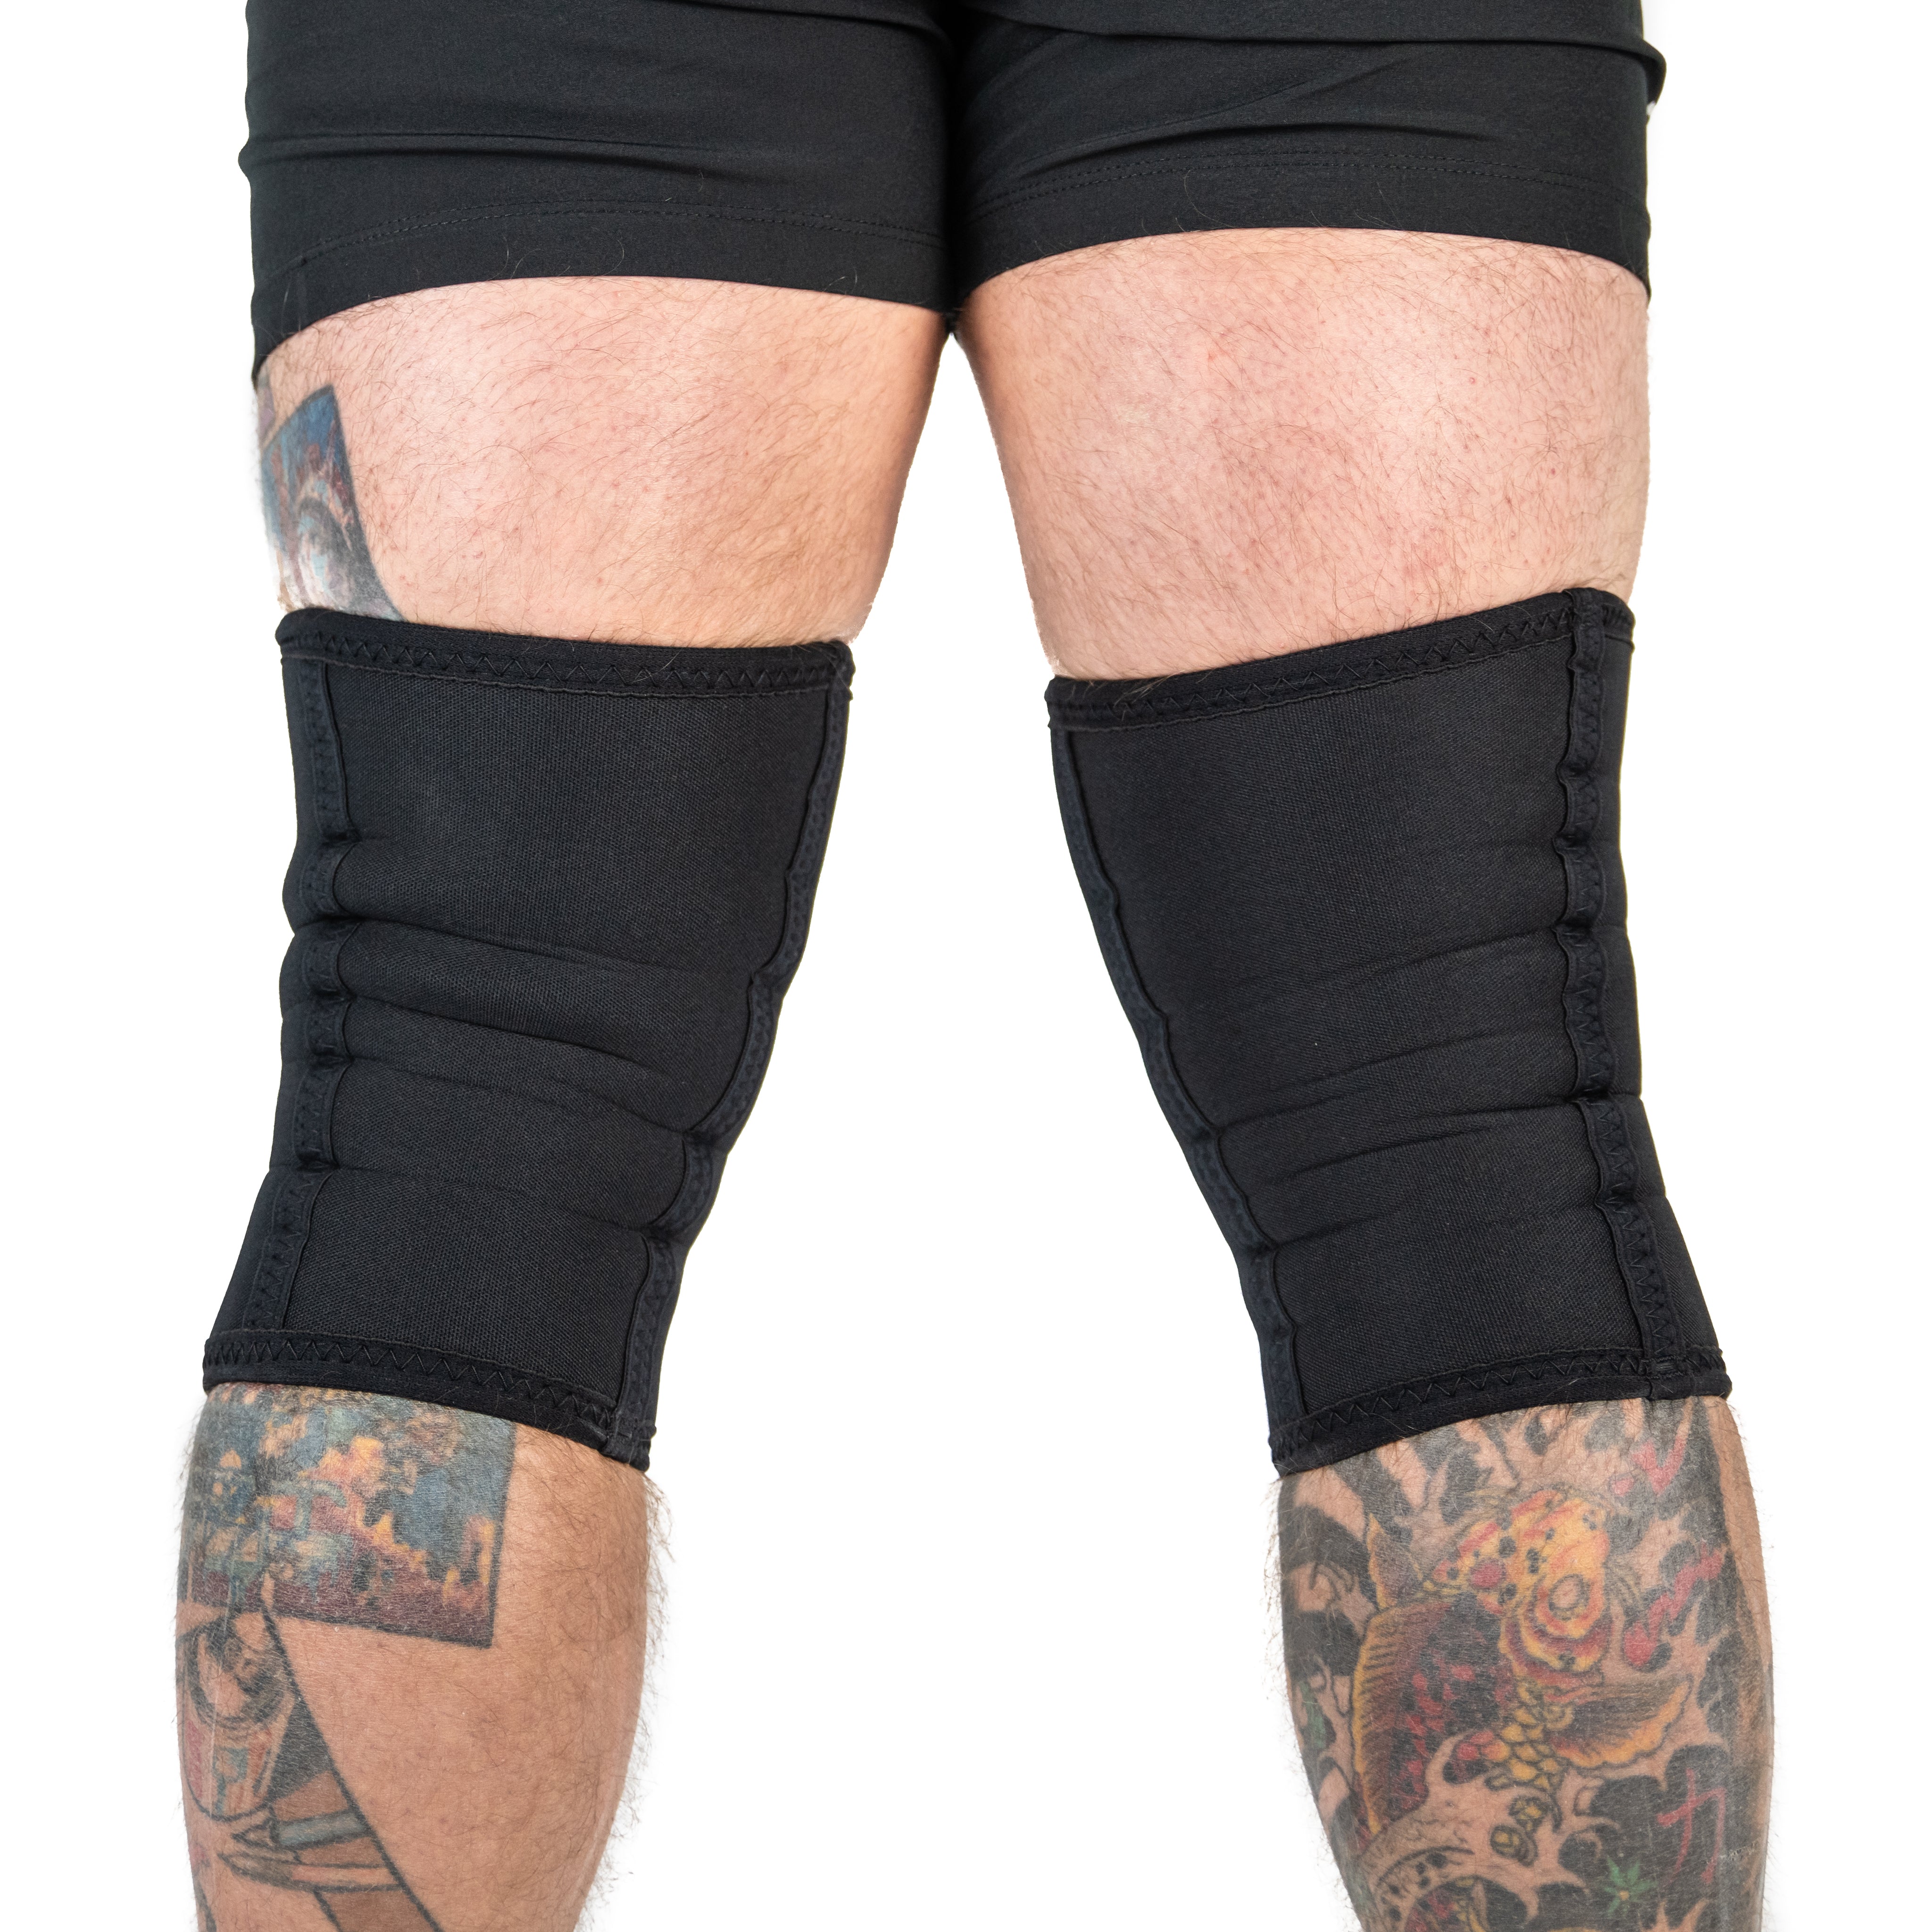 A7 Stealth Stiff Sleeves knee sleeves are structured with a downward cut panel on the back of the quad and calf to ensure these have the ultimate compression at the knee joint. The A7 CONE Gold Standard Stiff Knee Sleeves are IPF approved and are allowed in all IPF competitions and affiliate federations like the European Powerlifting Federation and all federations across Europe. . A7 Stealth Stiff Sleeves knee sleeves are IPF Approved Kit. A7 UK shipping to UK and Europe.